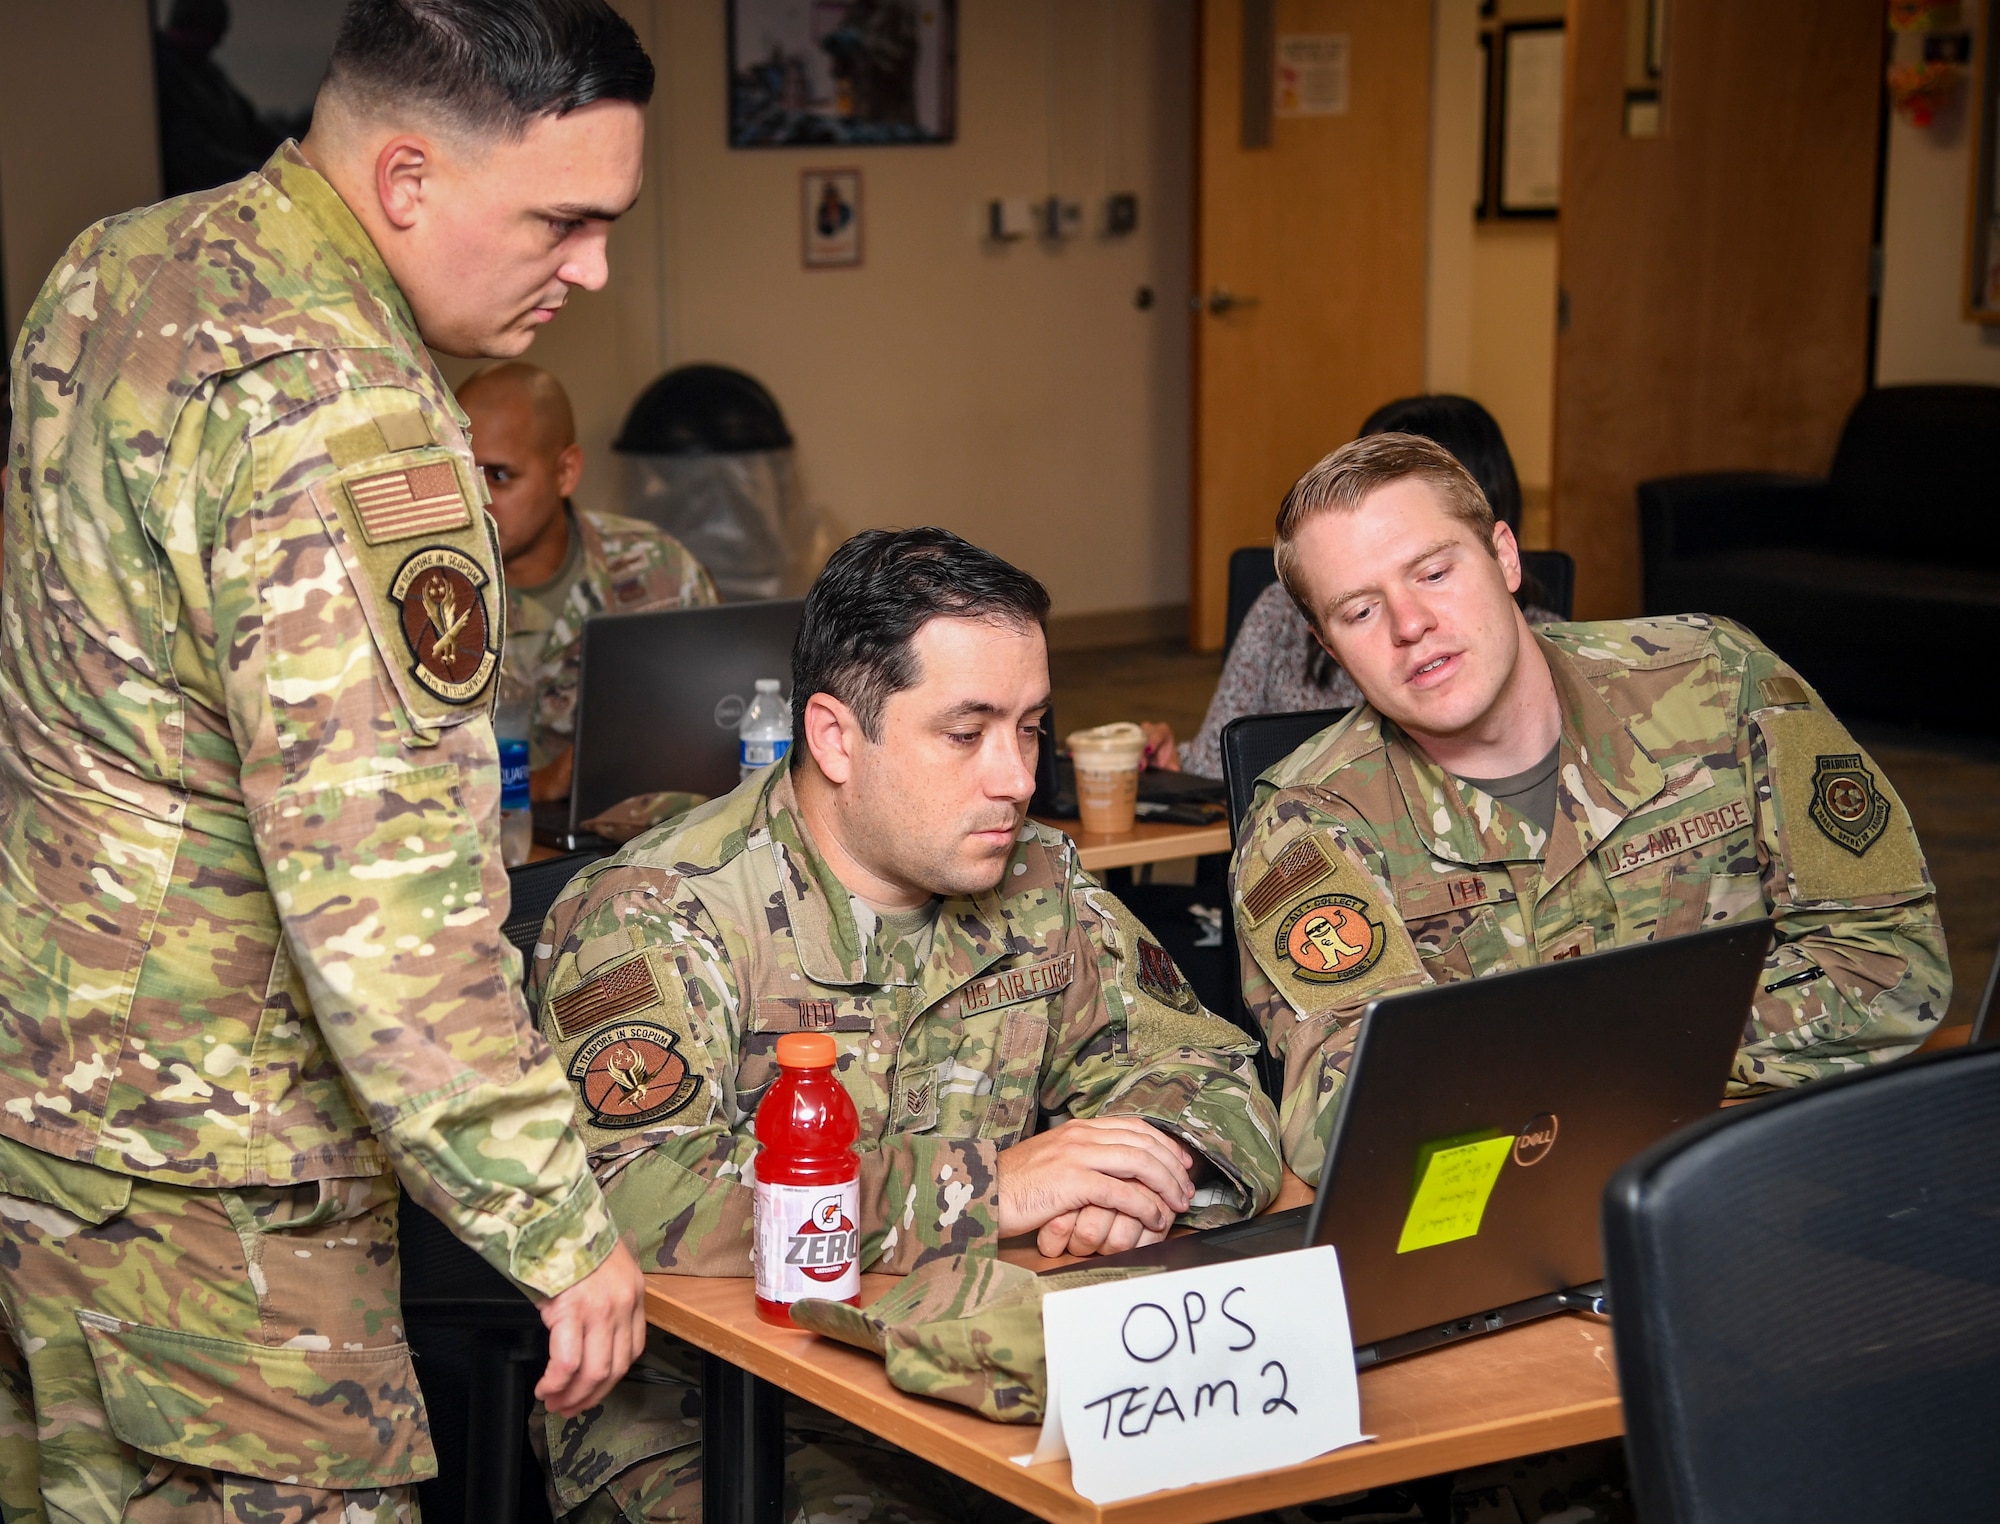 Three guys gather in front of a laptop and discuss information.